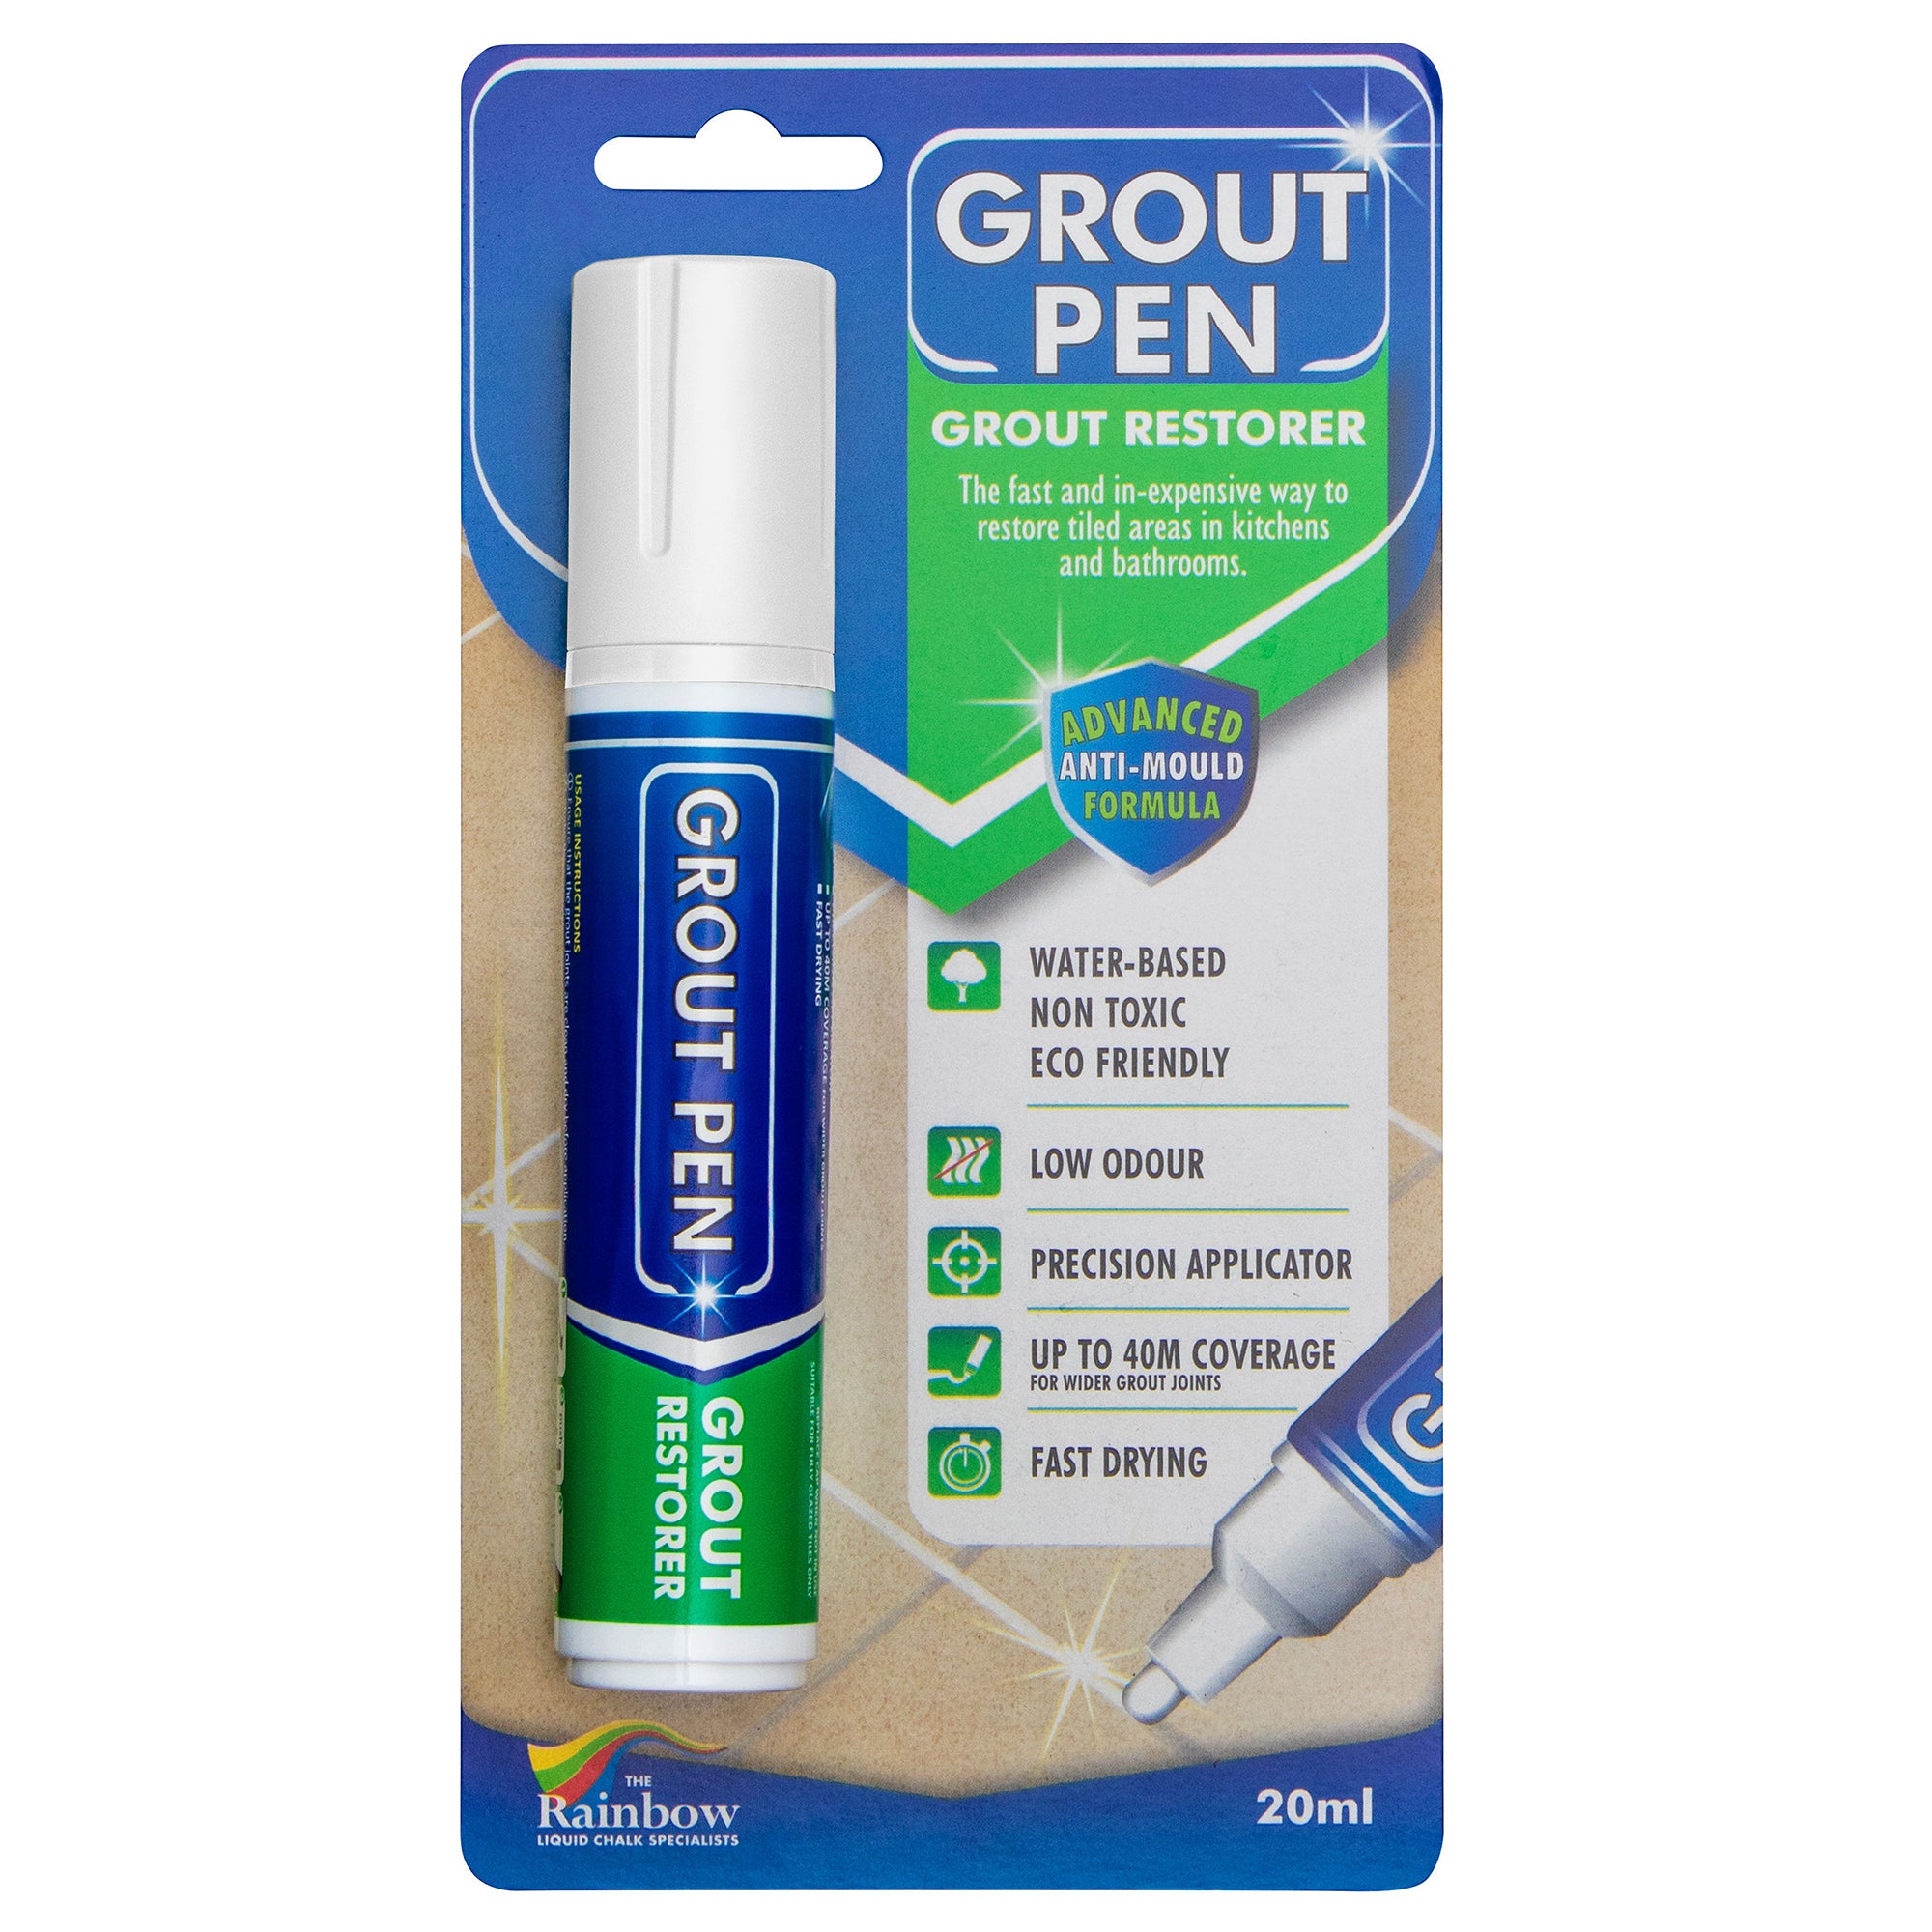 Grout Pen Large White - Ideal to Restore The Look of Tile Grout Lines